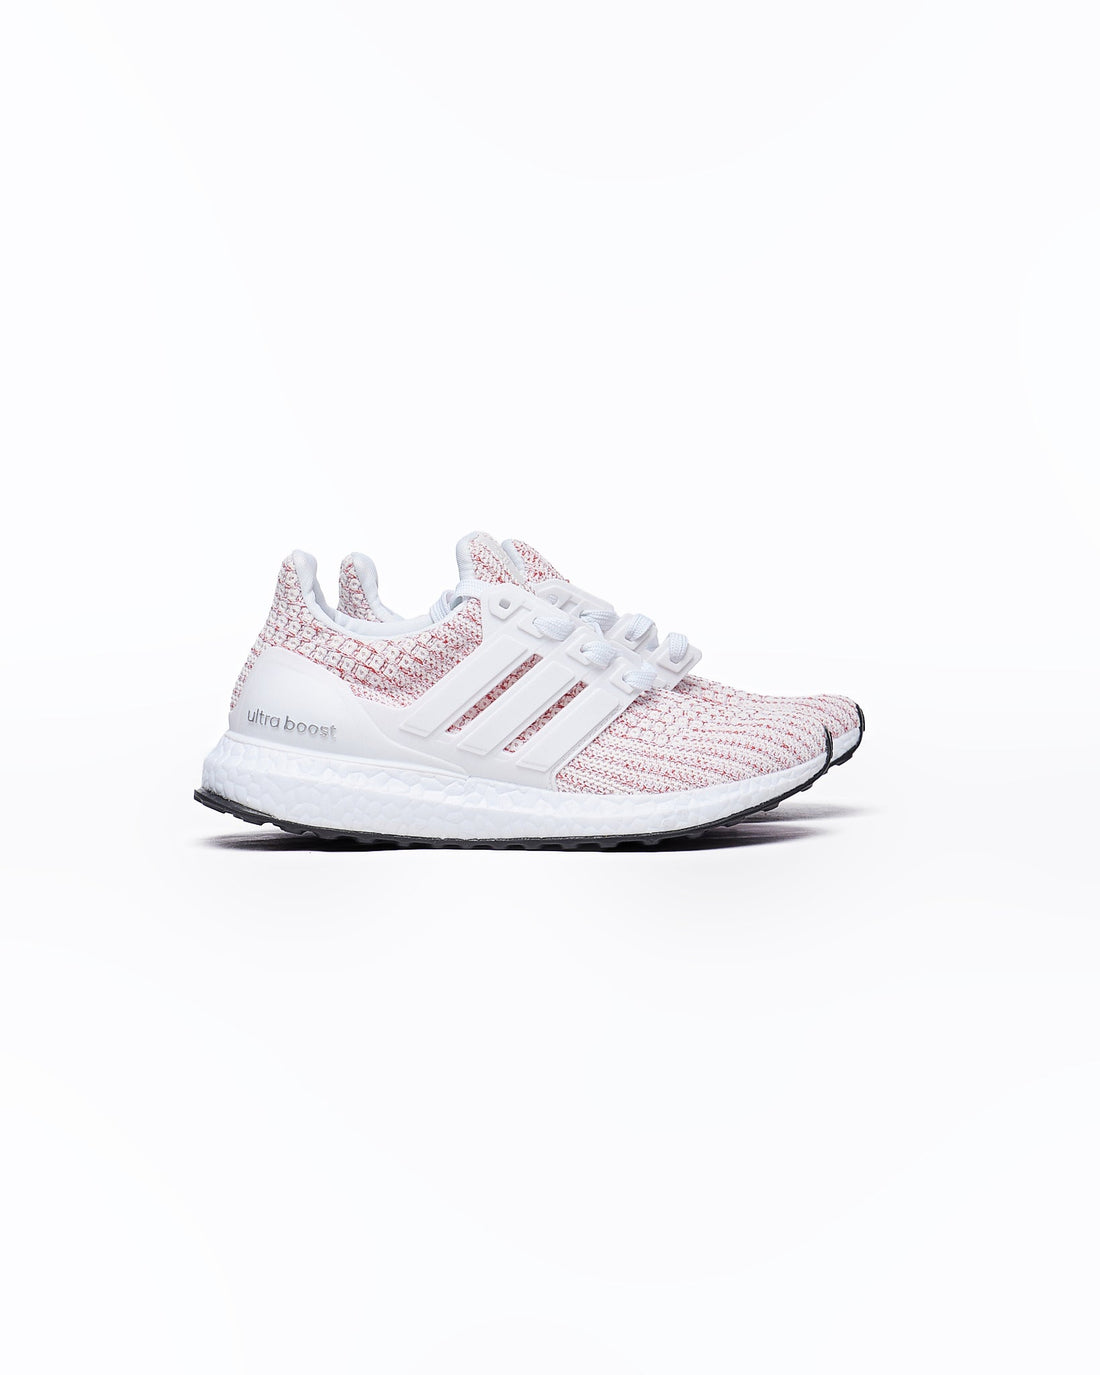 MOI OUTFIT-ADI Ultra Boost Lady Pink Runners Shoes 39.90